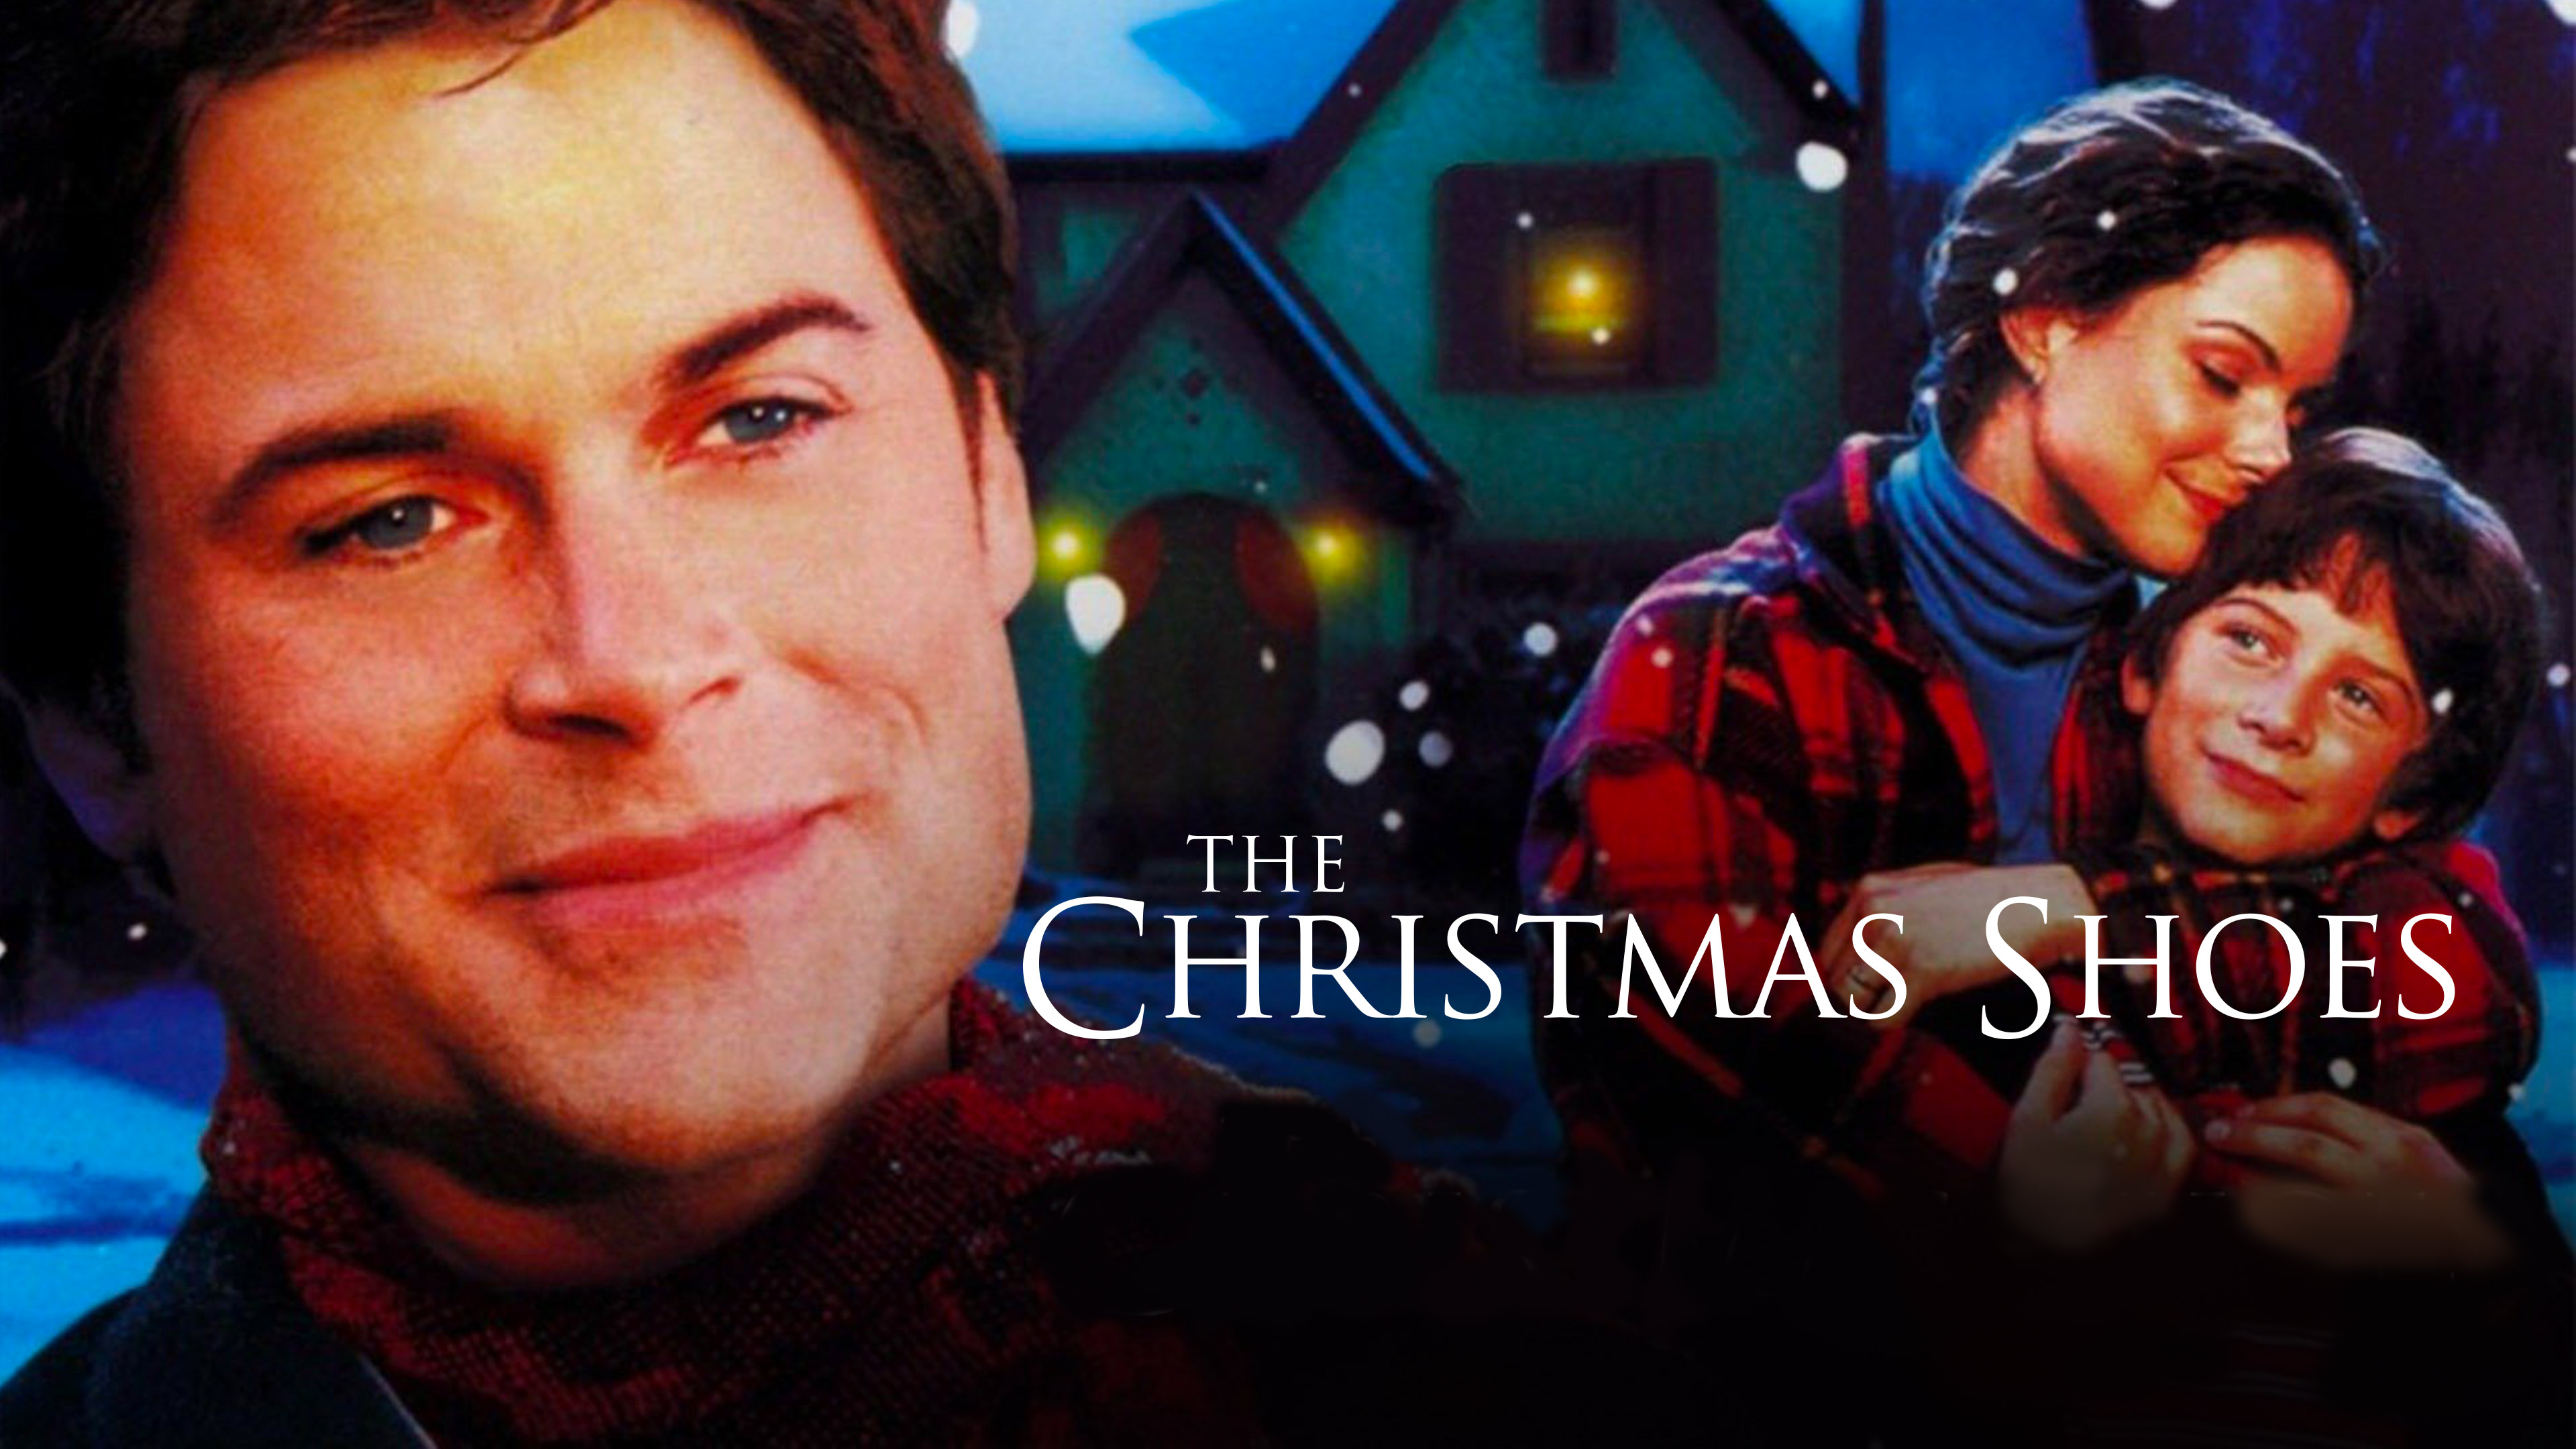 Watch The Christmas Shoes Online | Stream Full Movies